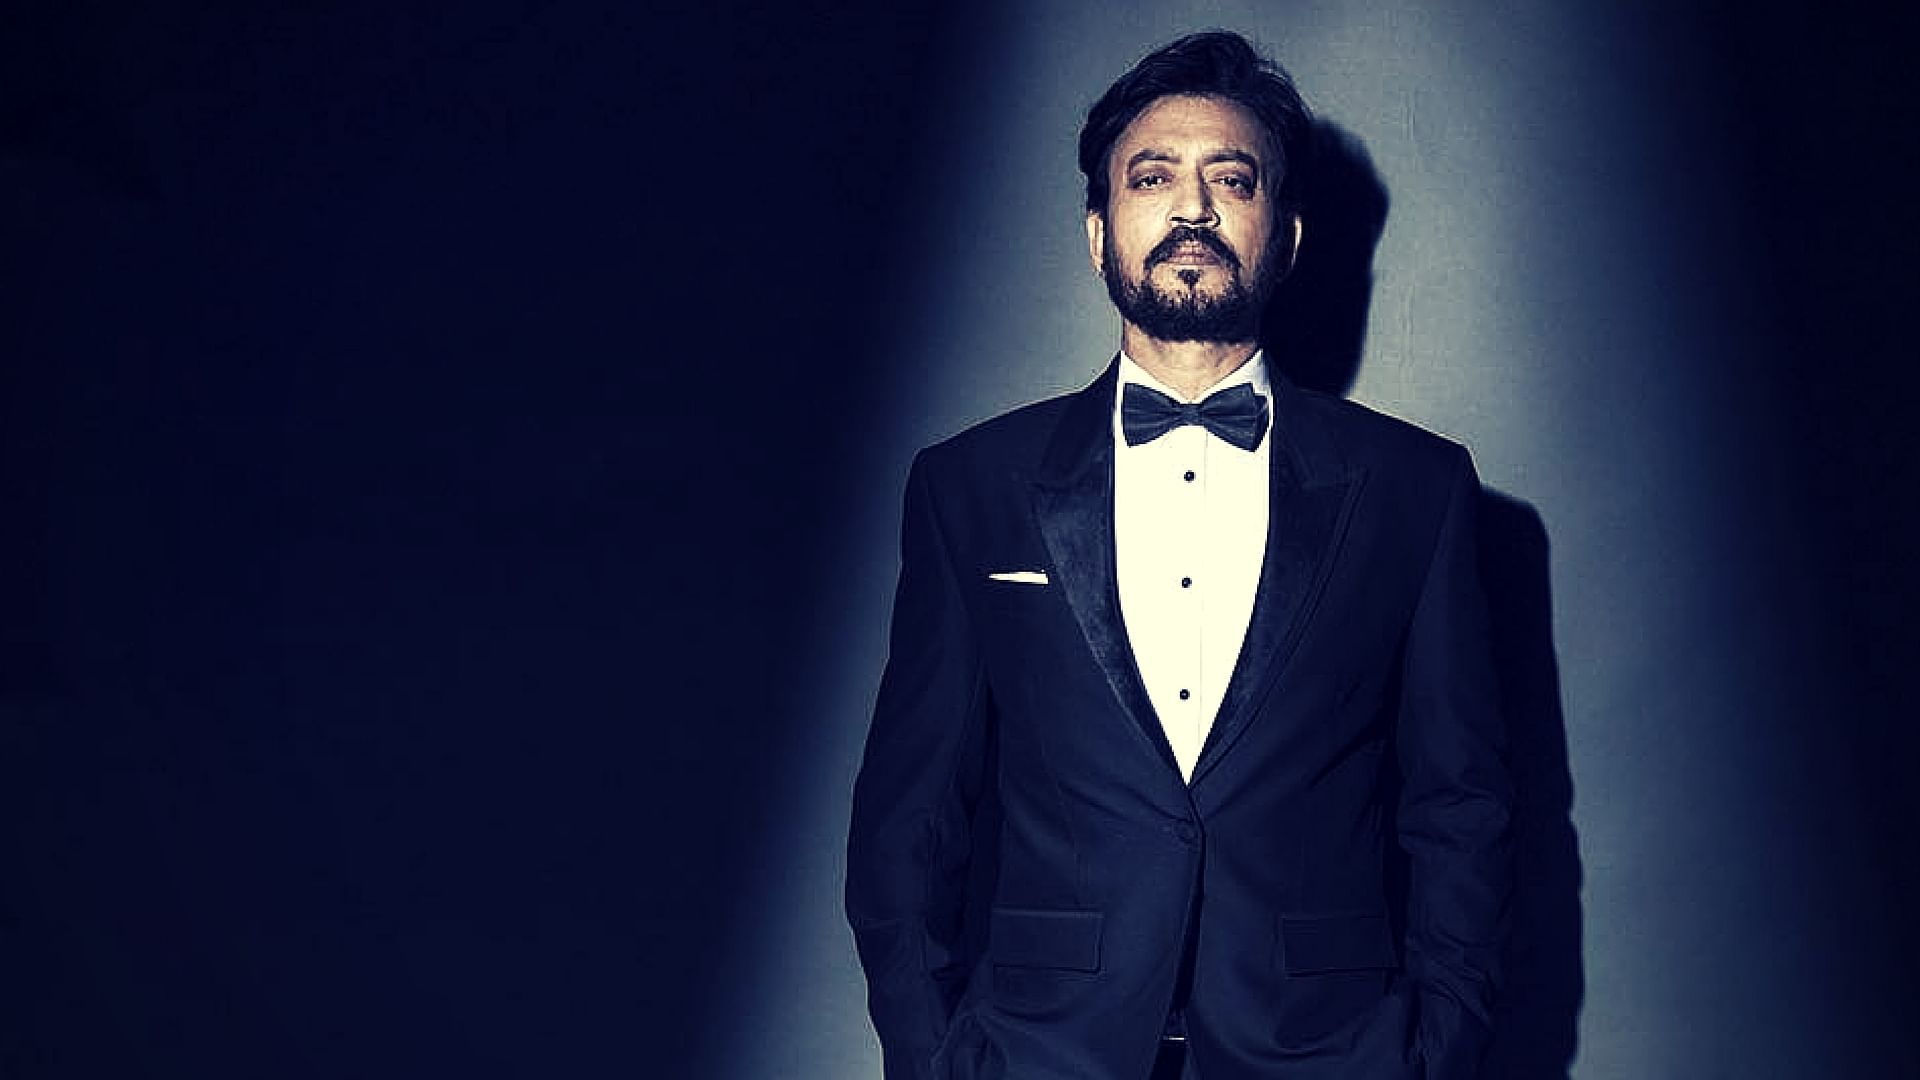 Irrfan Khan’s acting prowess stands unmatched in Bollywood today.